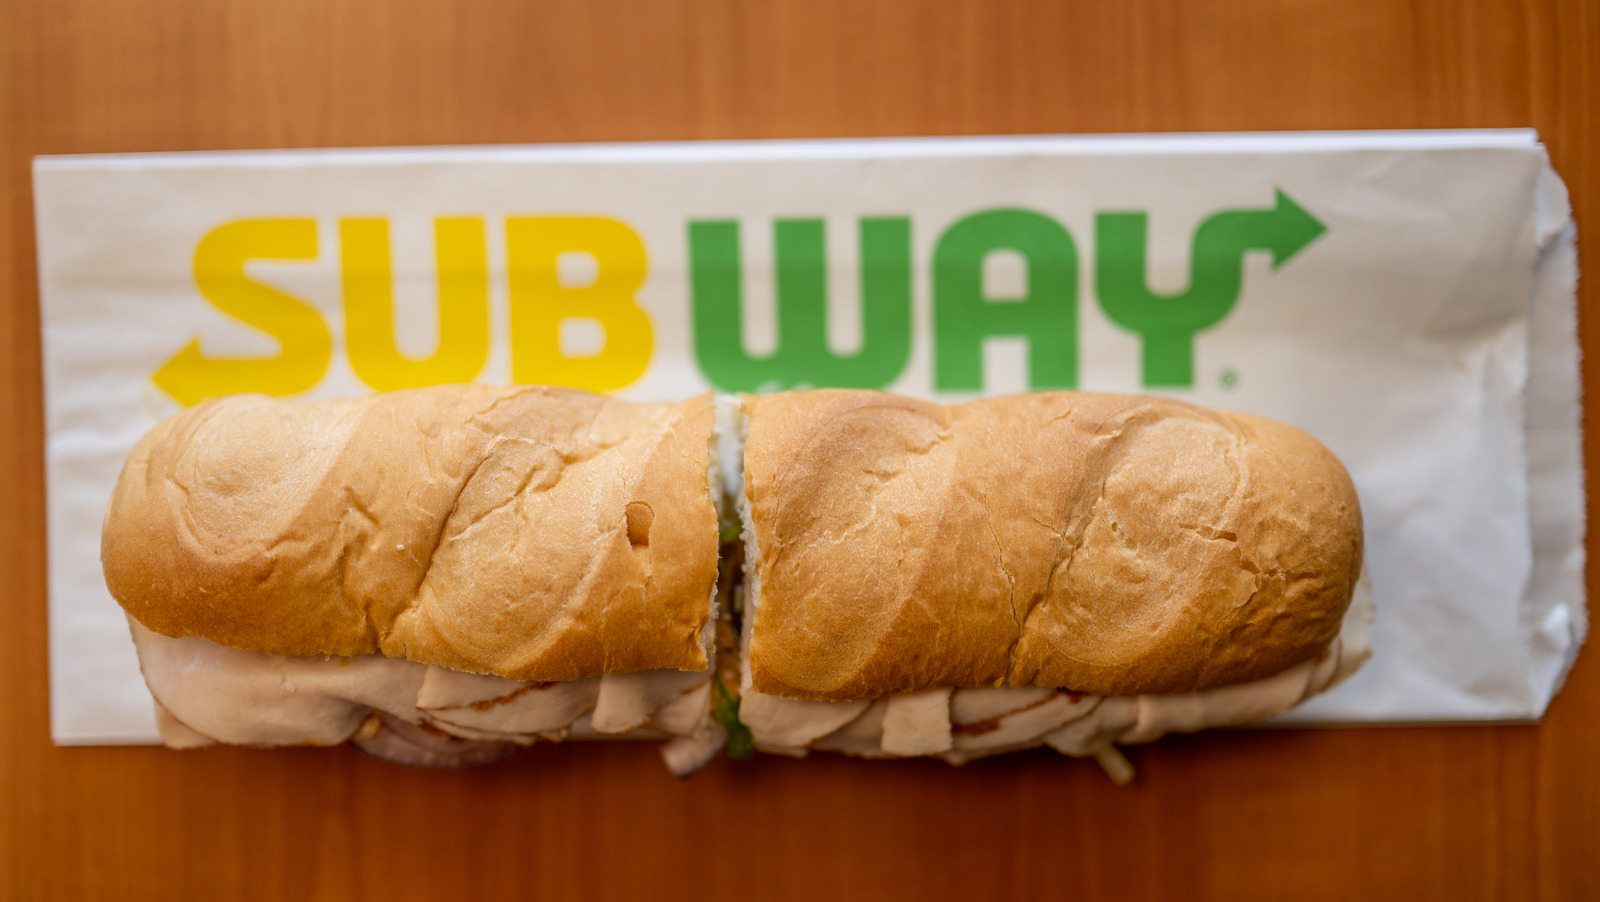 Subway Restaurants to Slice Their Own Deli Meat